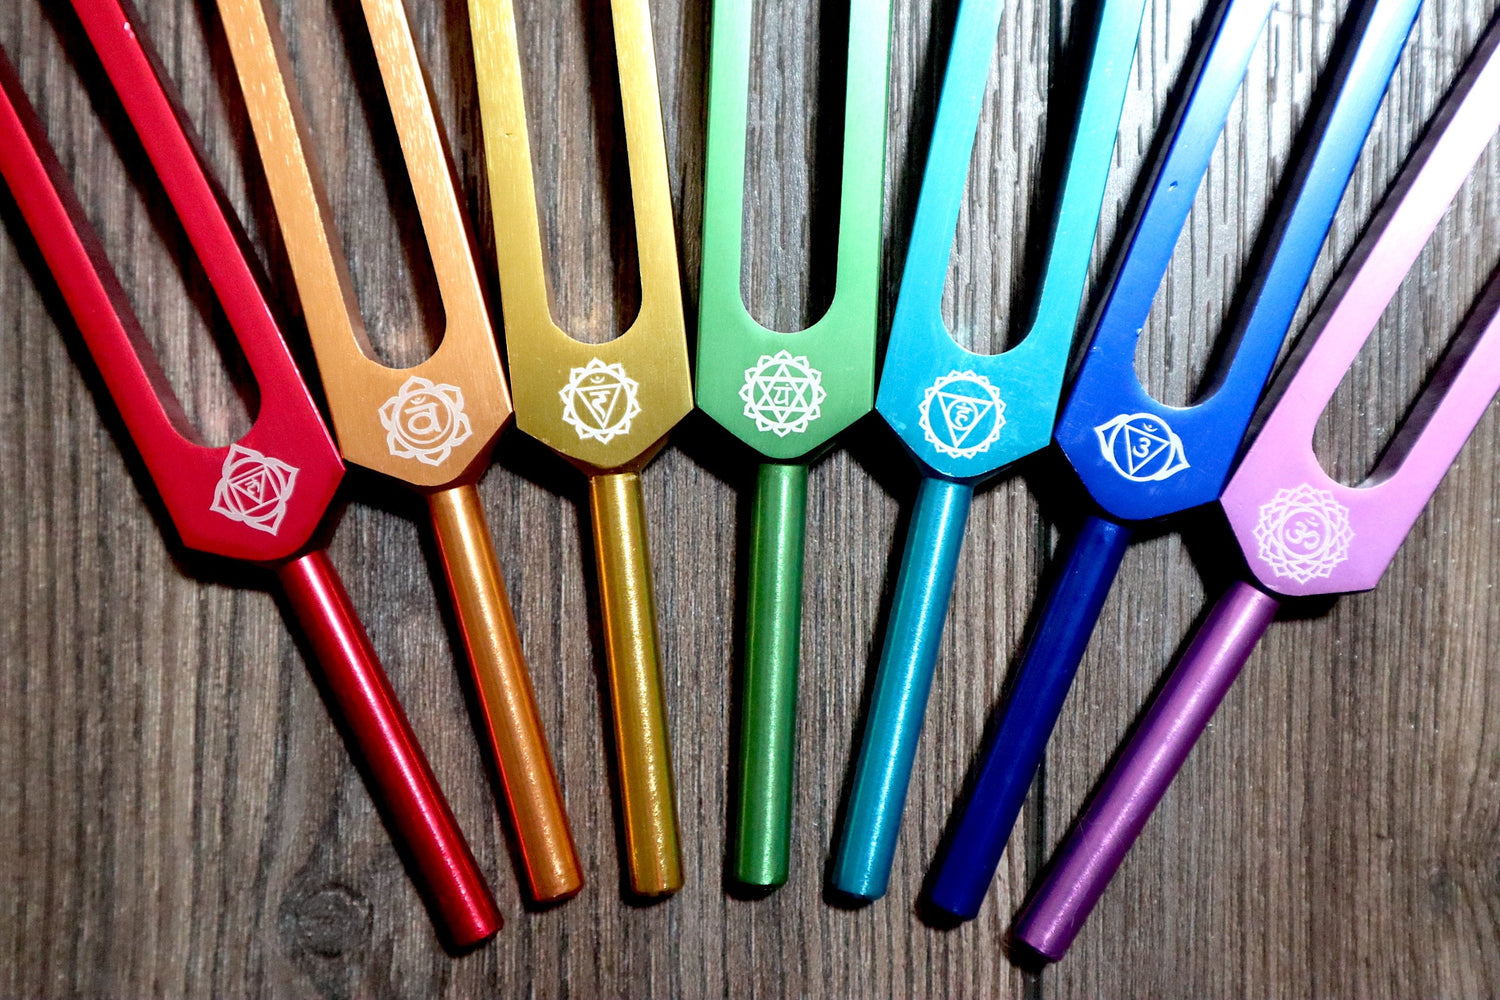 Mantra Tuning Forks - Professionally Tuned .25 Hz - 7pc Chakra Set for Practicing Mantra, Chakra Balancing and Alignment, Sound Vibration